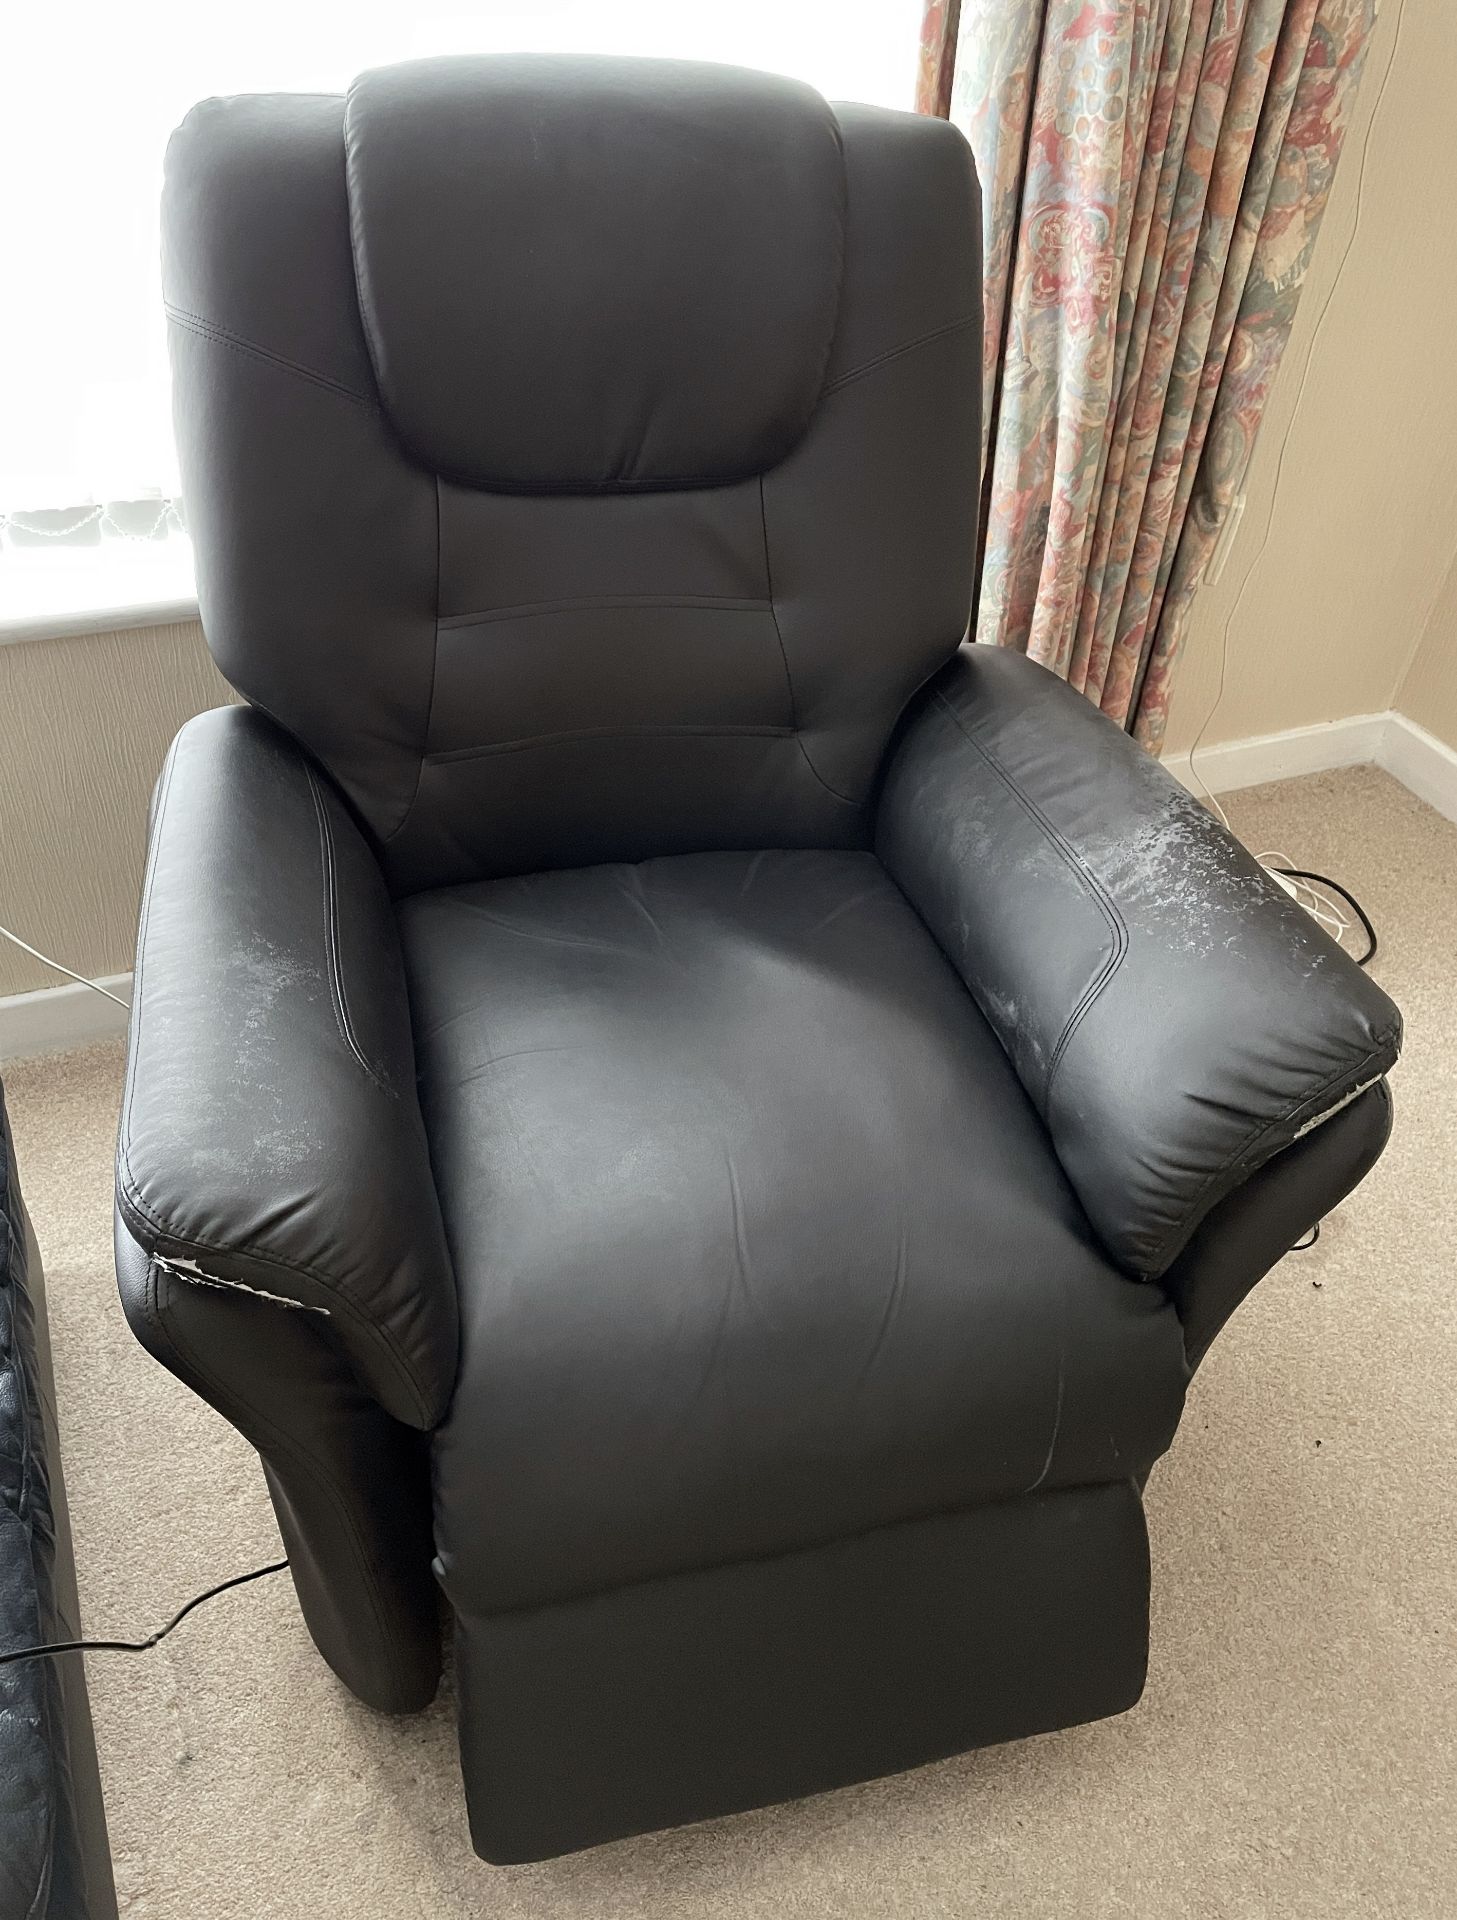 1 x Stylish Motorised Recliner Chair In Black - From An Exclusive Property In Leeds - No VAT on - Image 2 of 7